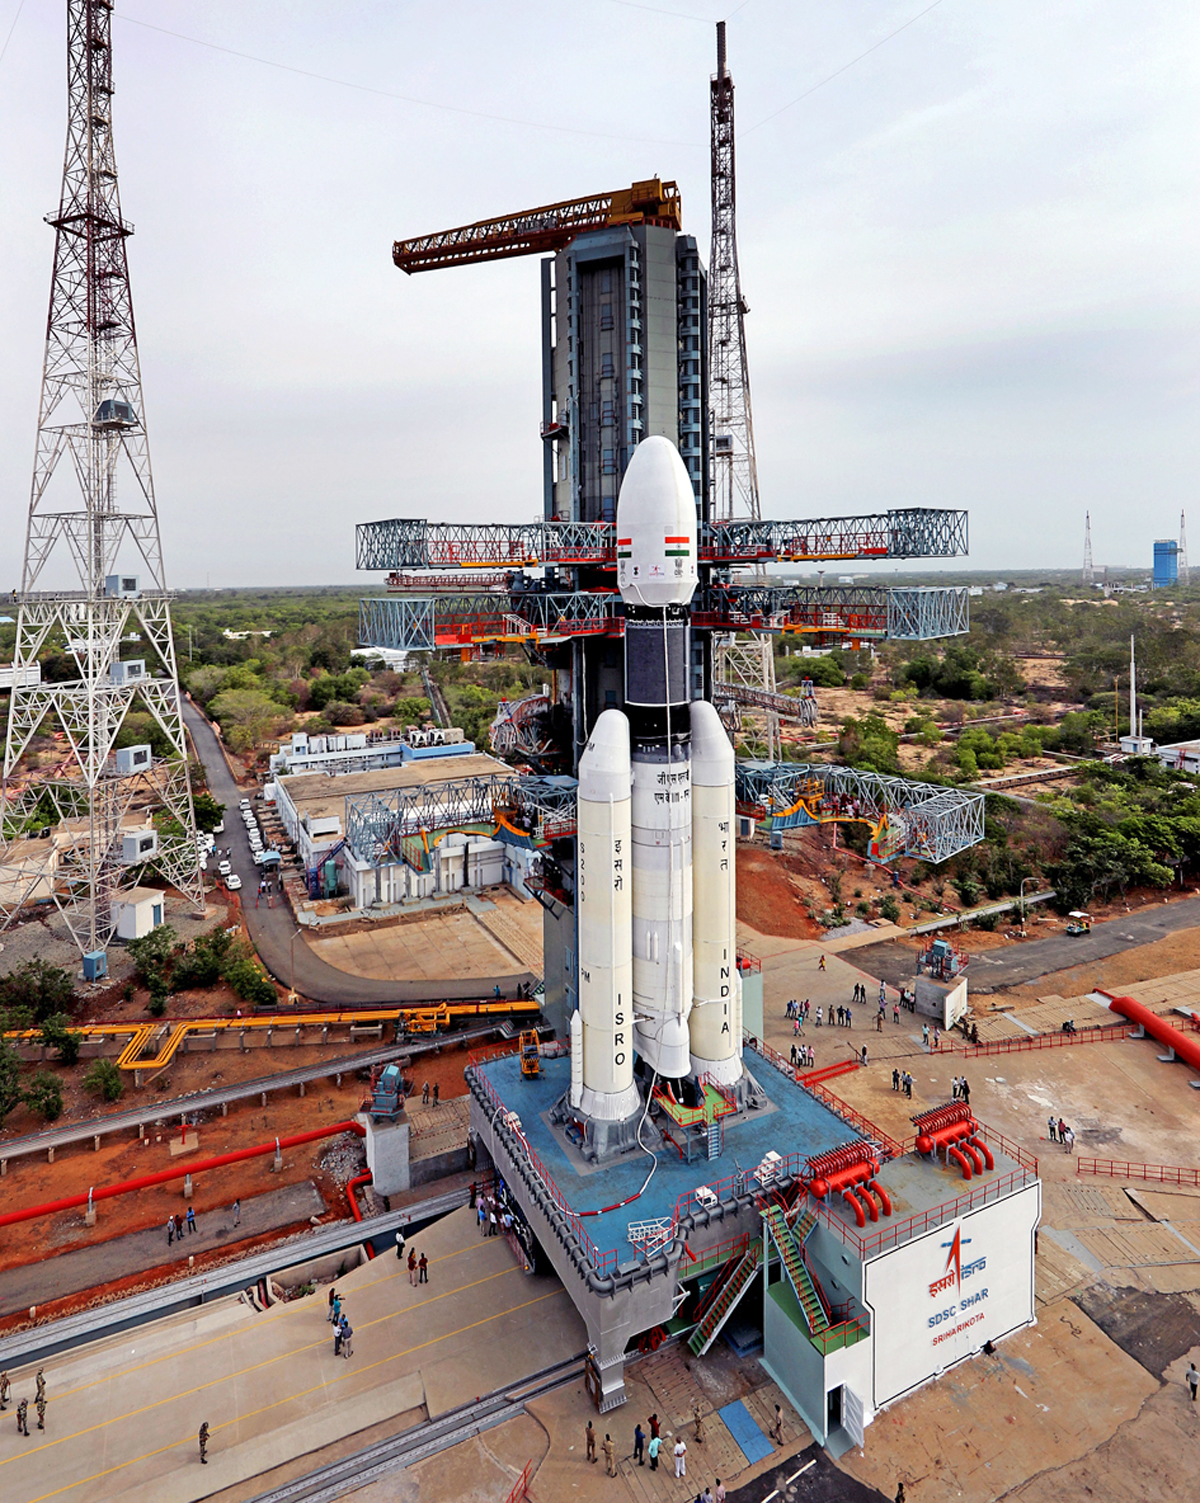 A view of GSLV Mk-III carrying Chandrayaan-2 payloads Scheduled to be launched from Satish Dhawan Space Centre on 15th July at second launch pad, in Sriharikota on Sunday. (UNI)